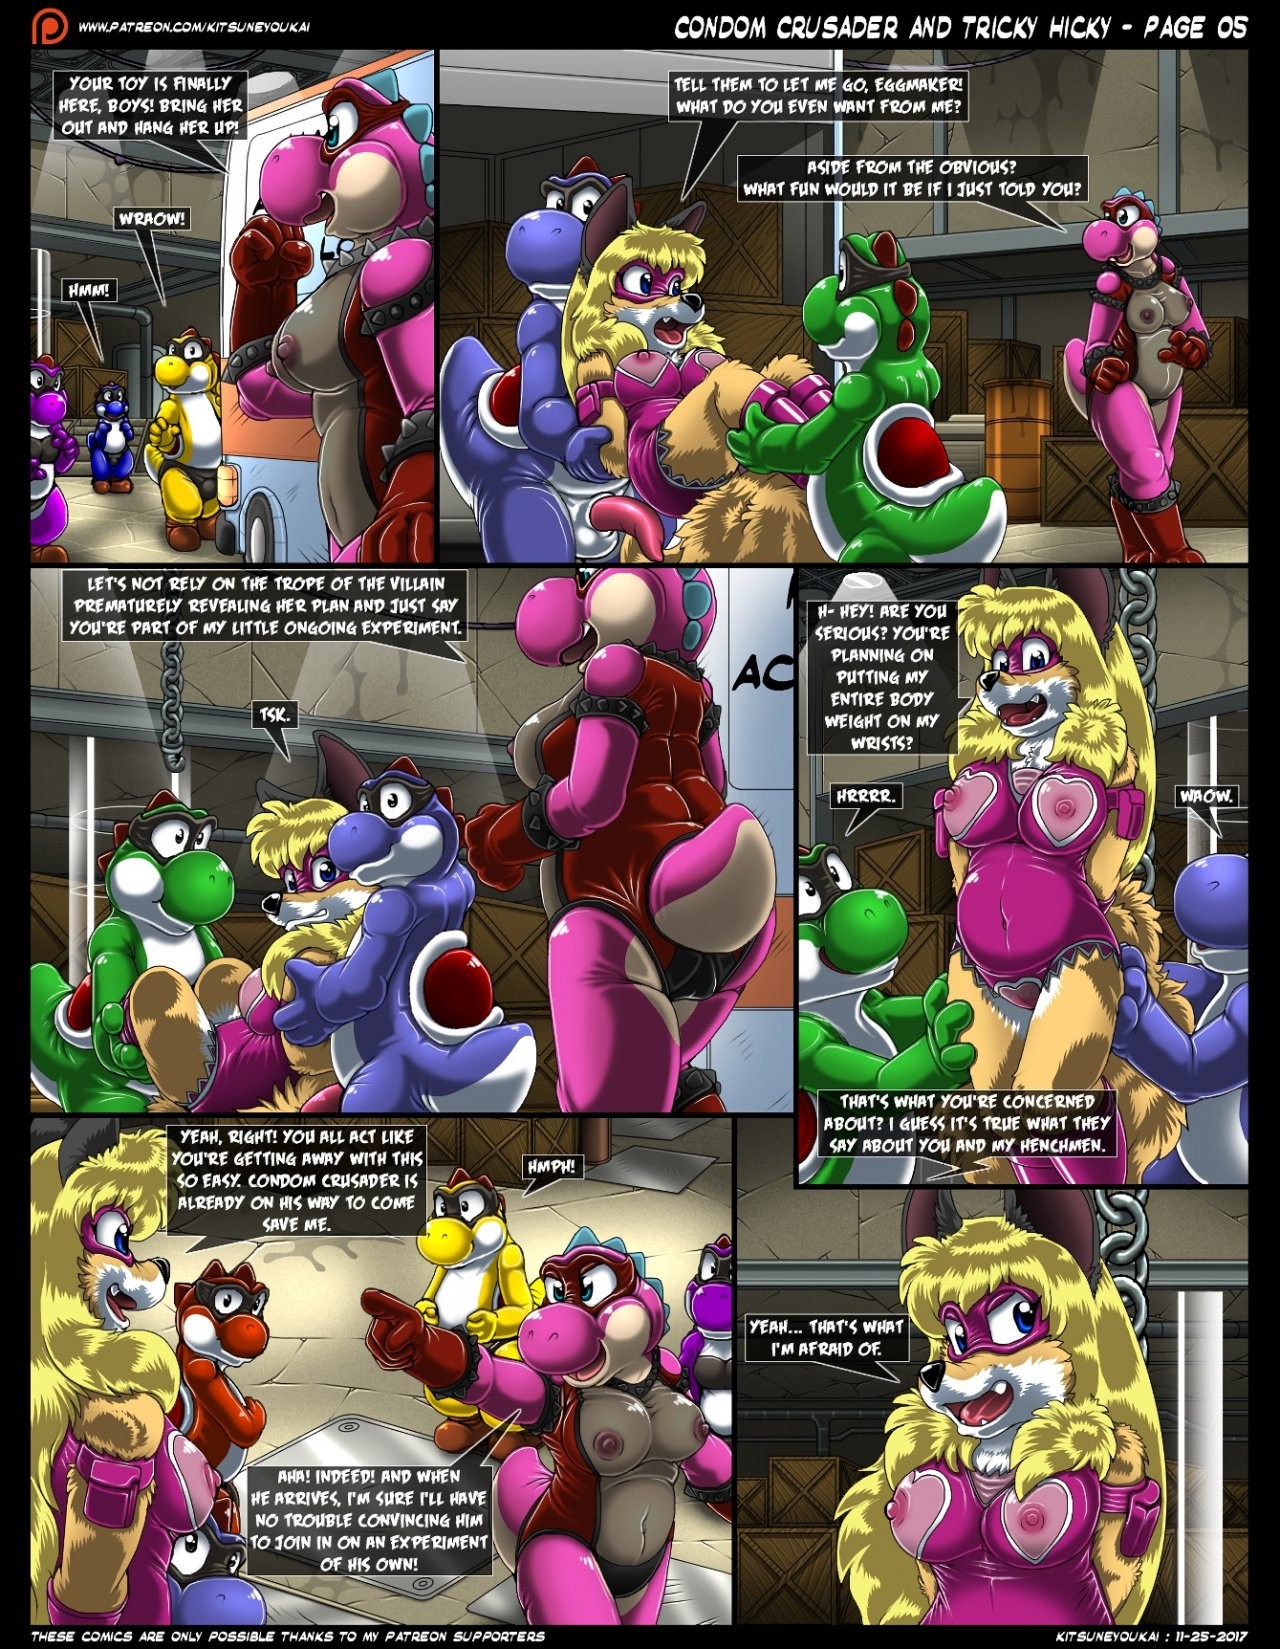 Condom Crusader and the Tricky Hicky porn comic picture 5